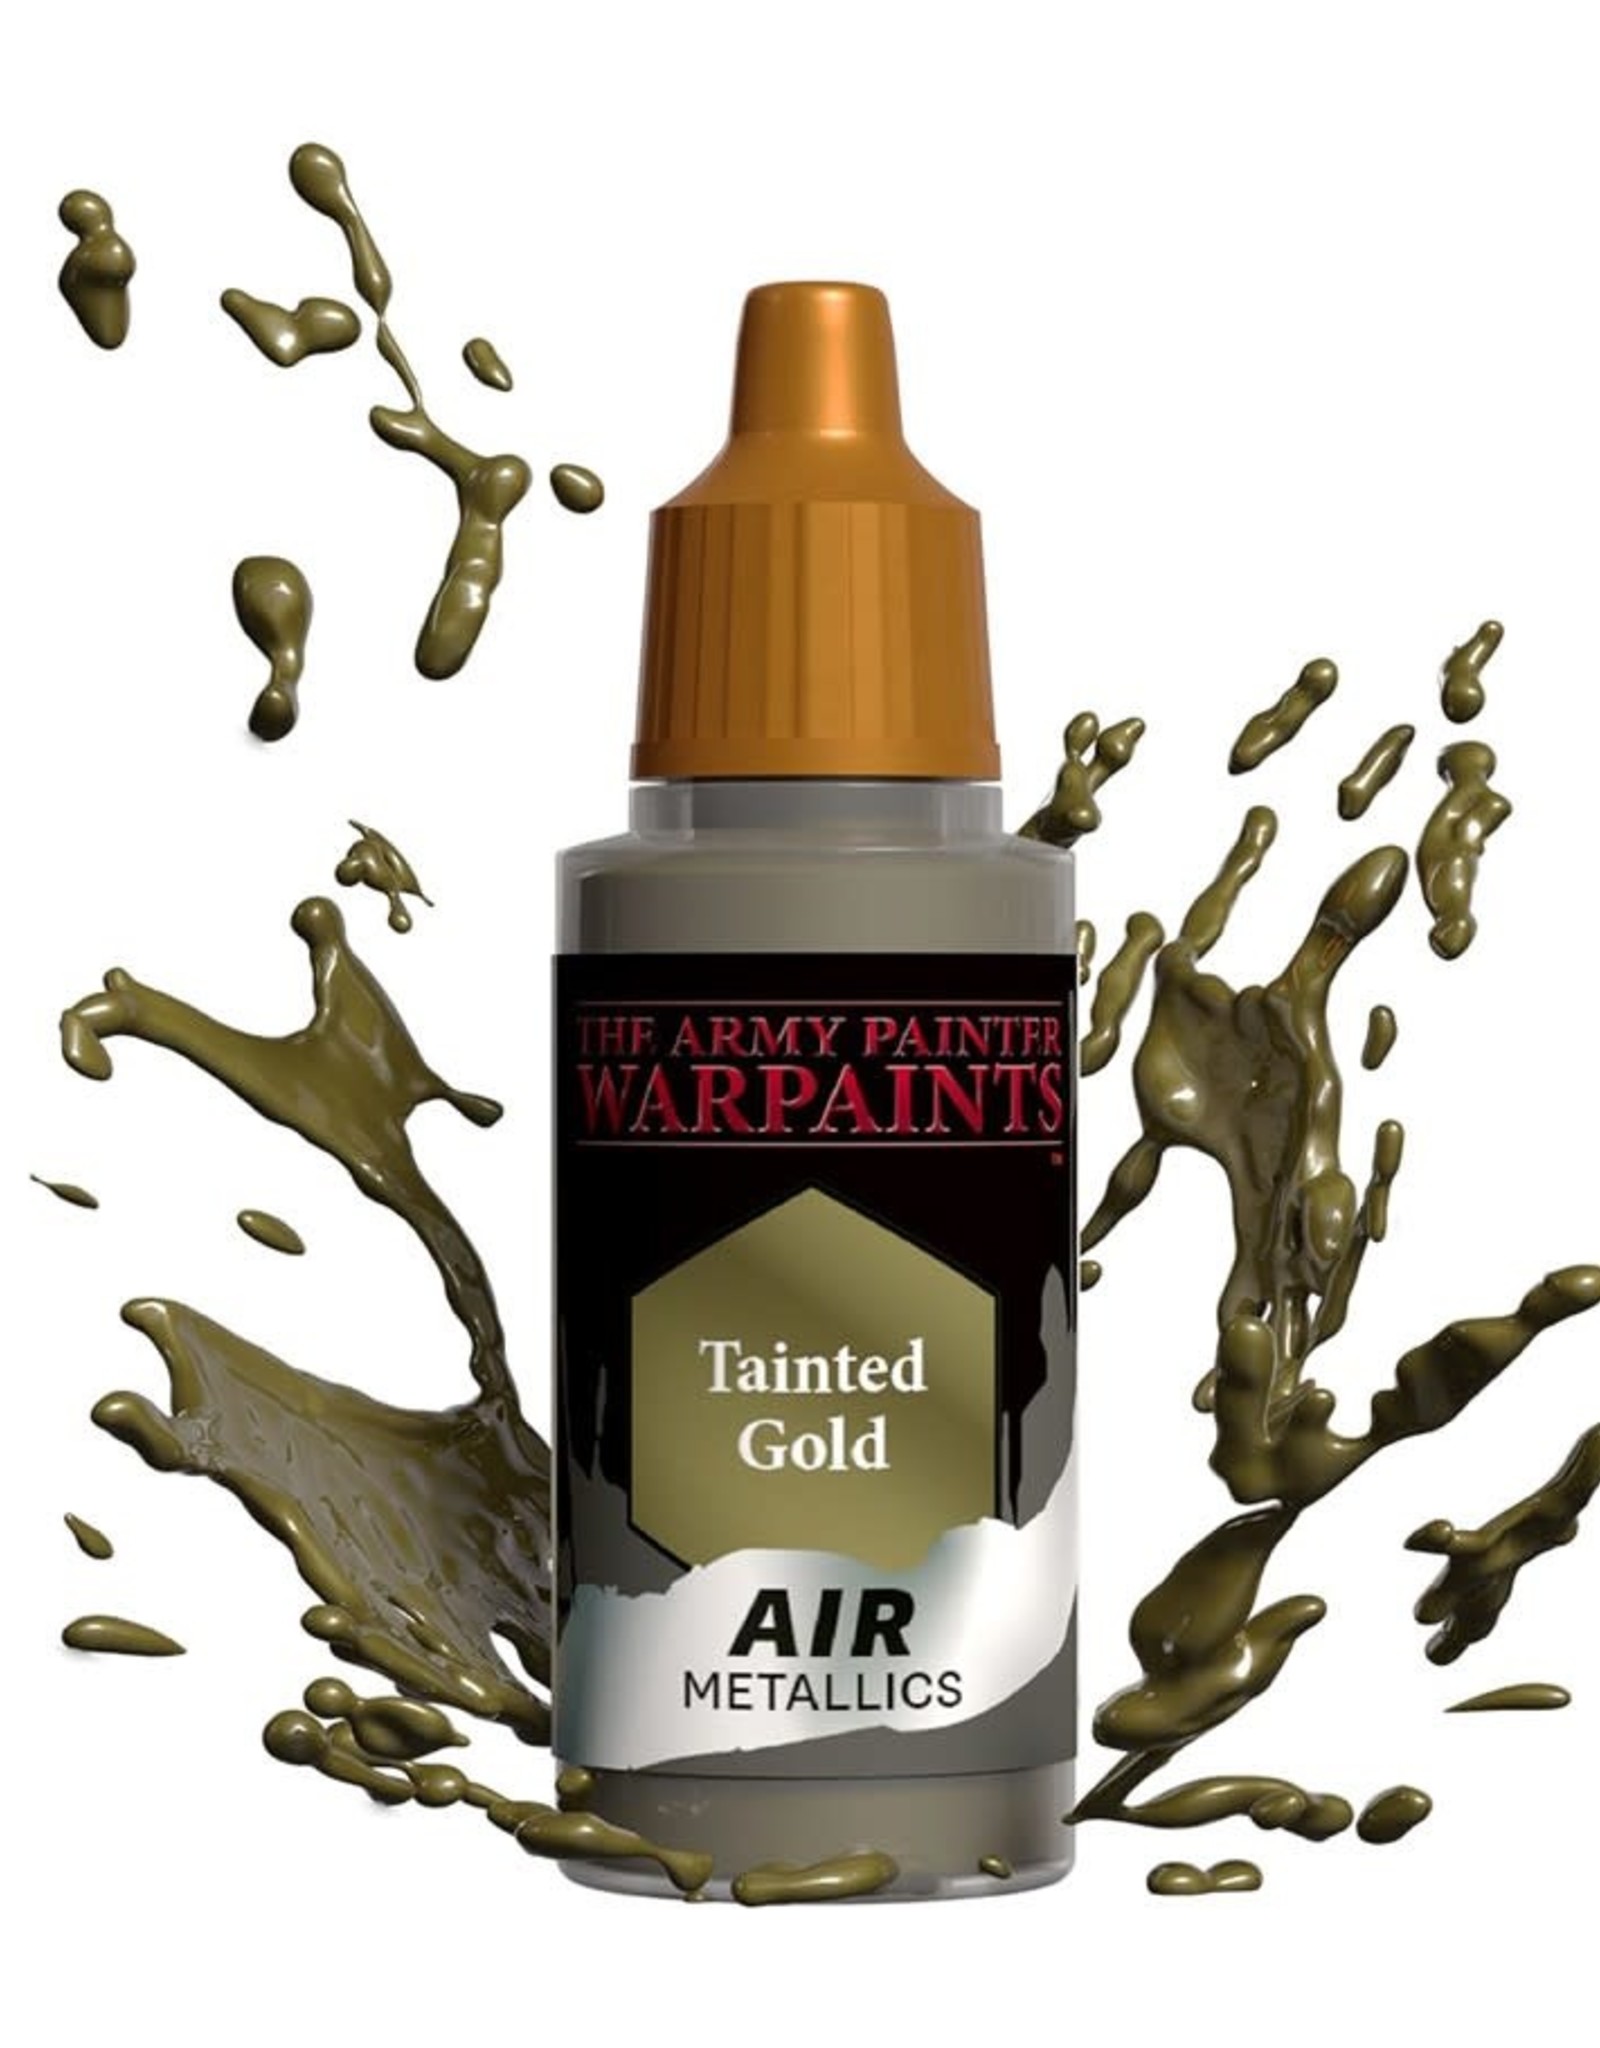 The Army Painter TAP Warpaints Air Metallics: Tainted Gold